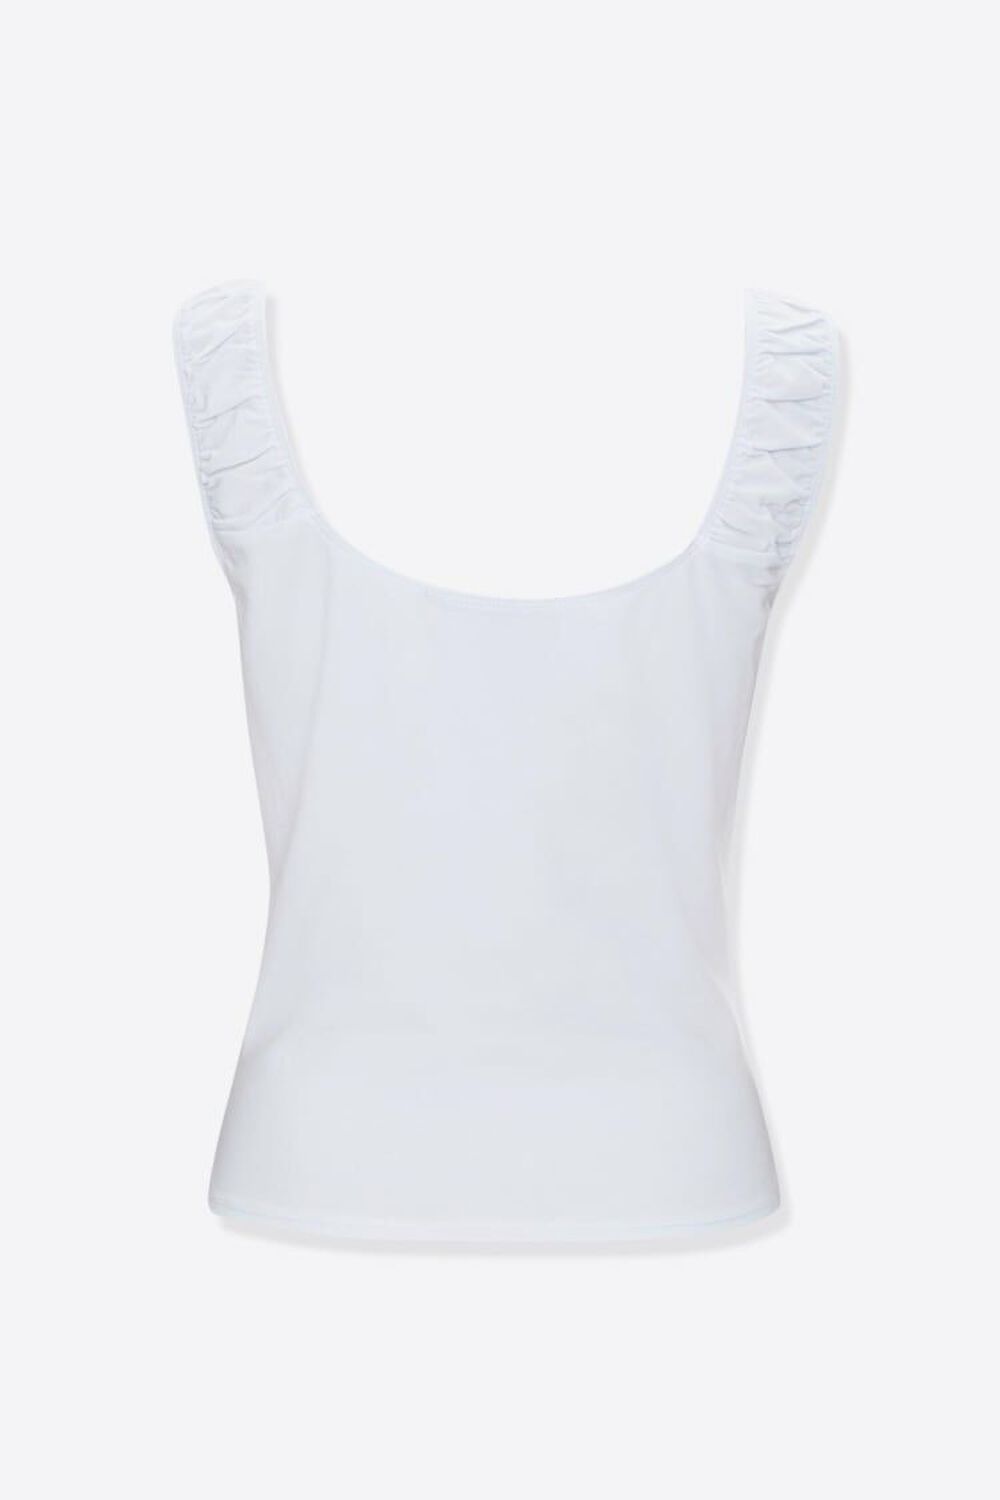 WHITE Ruched-Strap Tank Top, image 2